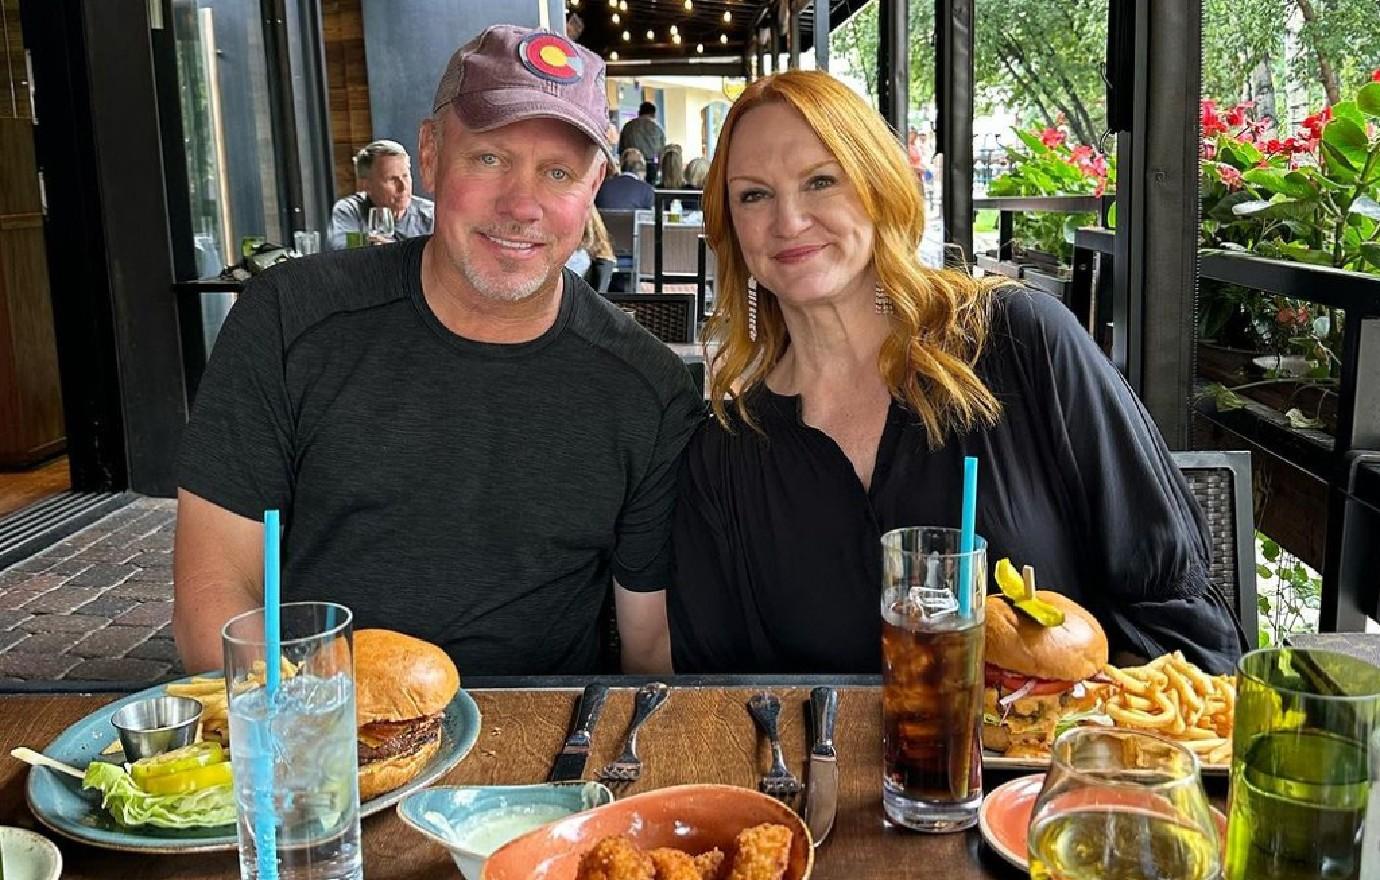 Pioneer Woman Ree Drummond marks 25th anniversary with husband Ladd: 'It's  been a wild adventure